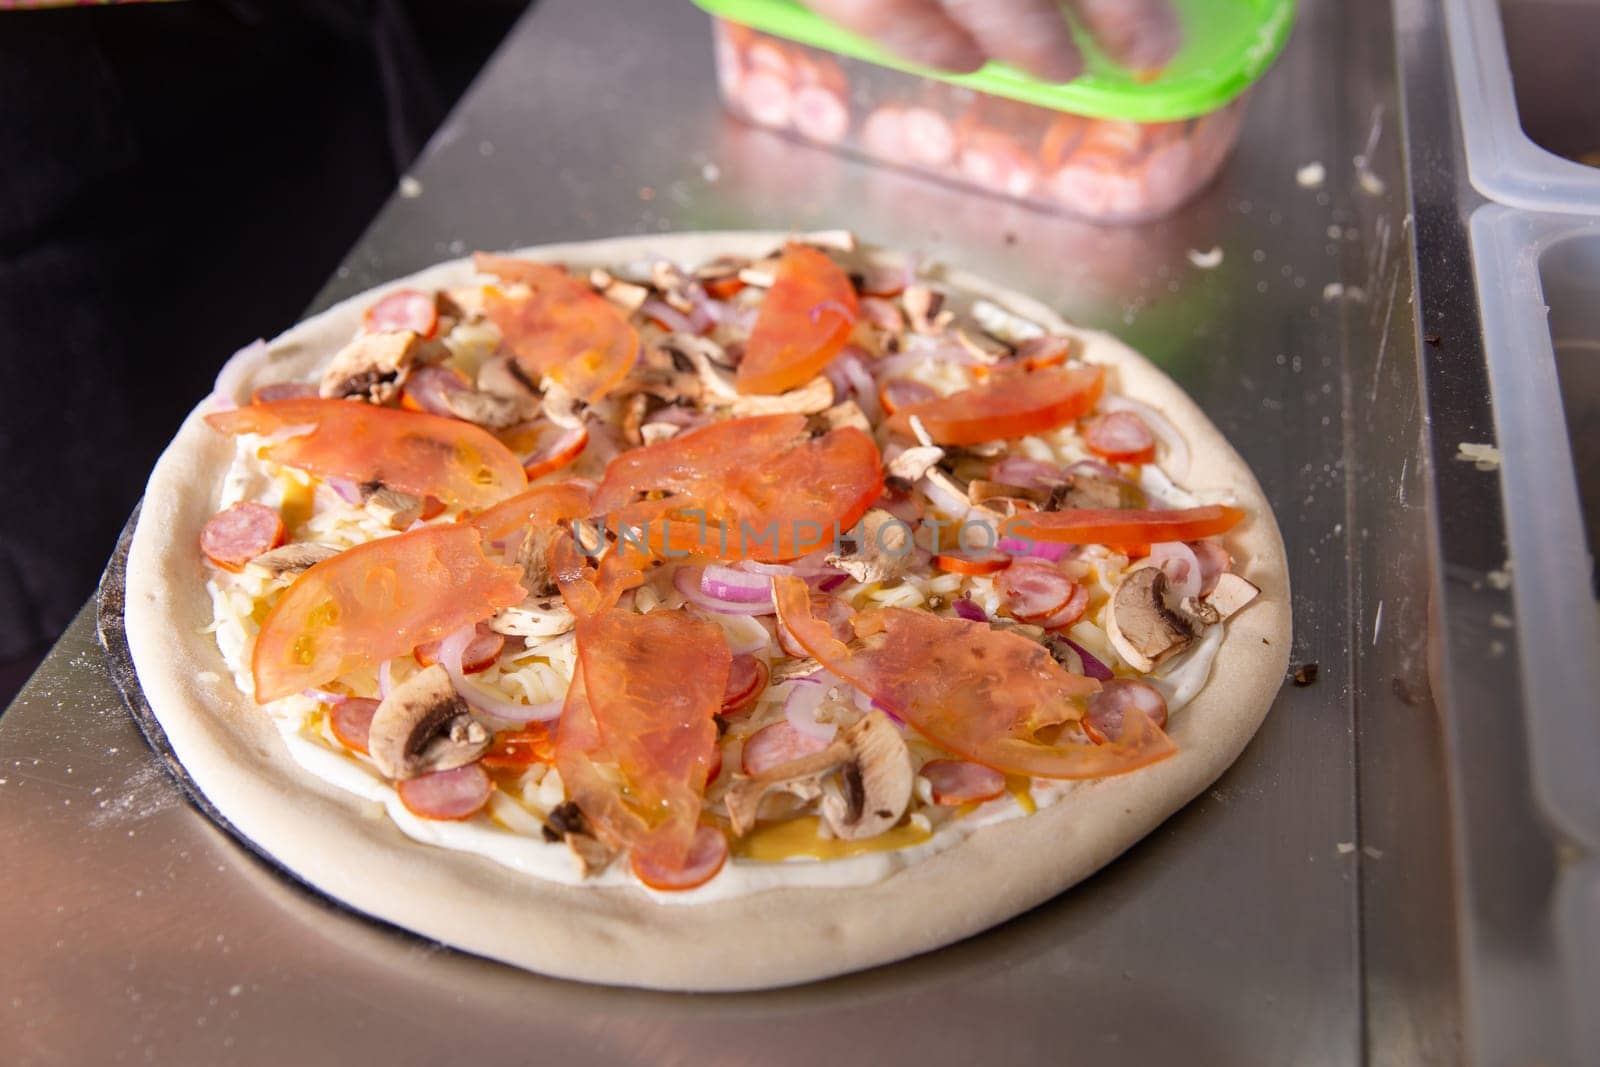 The chef prepares a classic Italian pizza with sausages, mushrooms and tomatoes. The cook decorates the pizza with tomatoes.